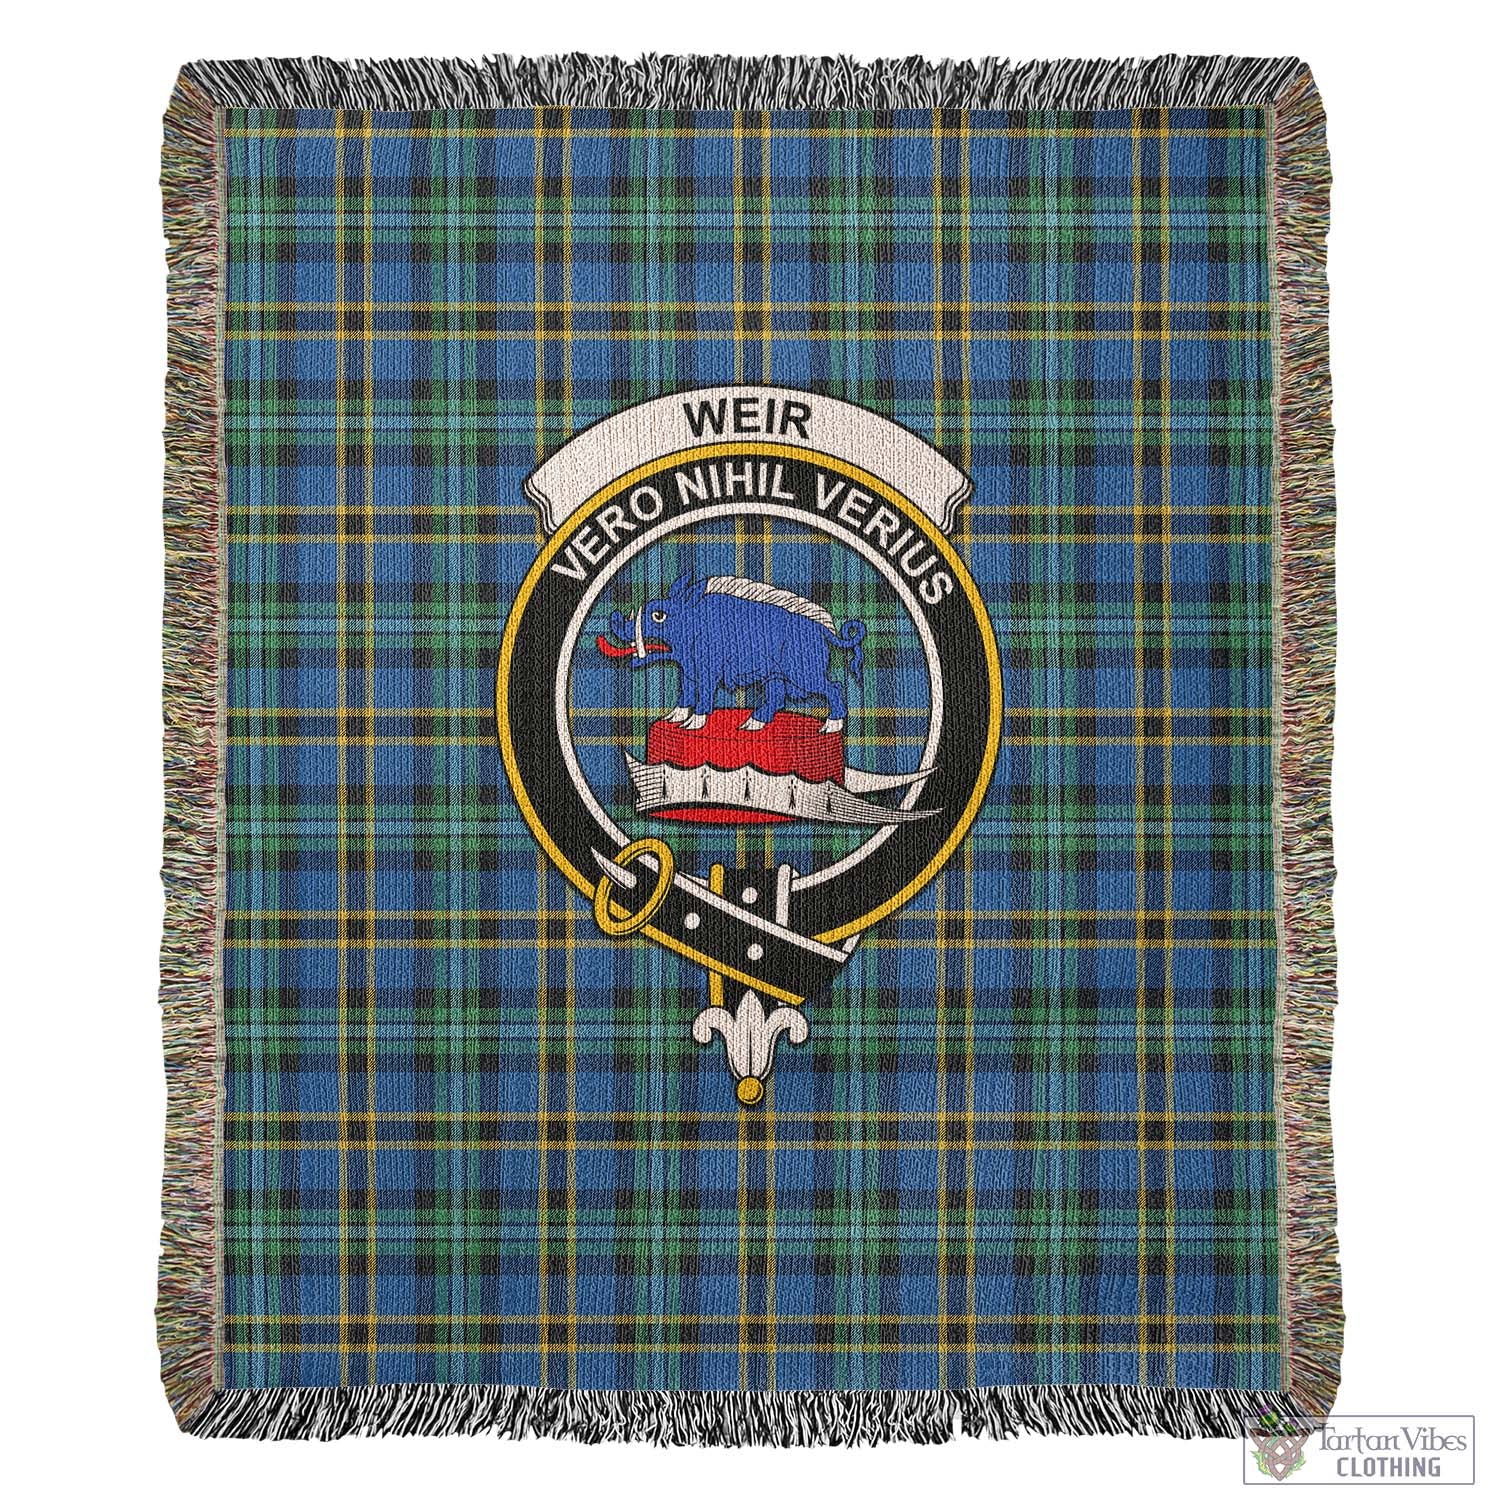 Tartan Vibes Clothing Weir Ancient Tartan Woven Blanket with Family Crest